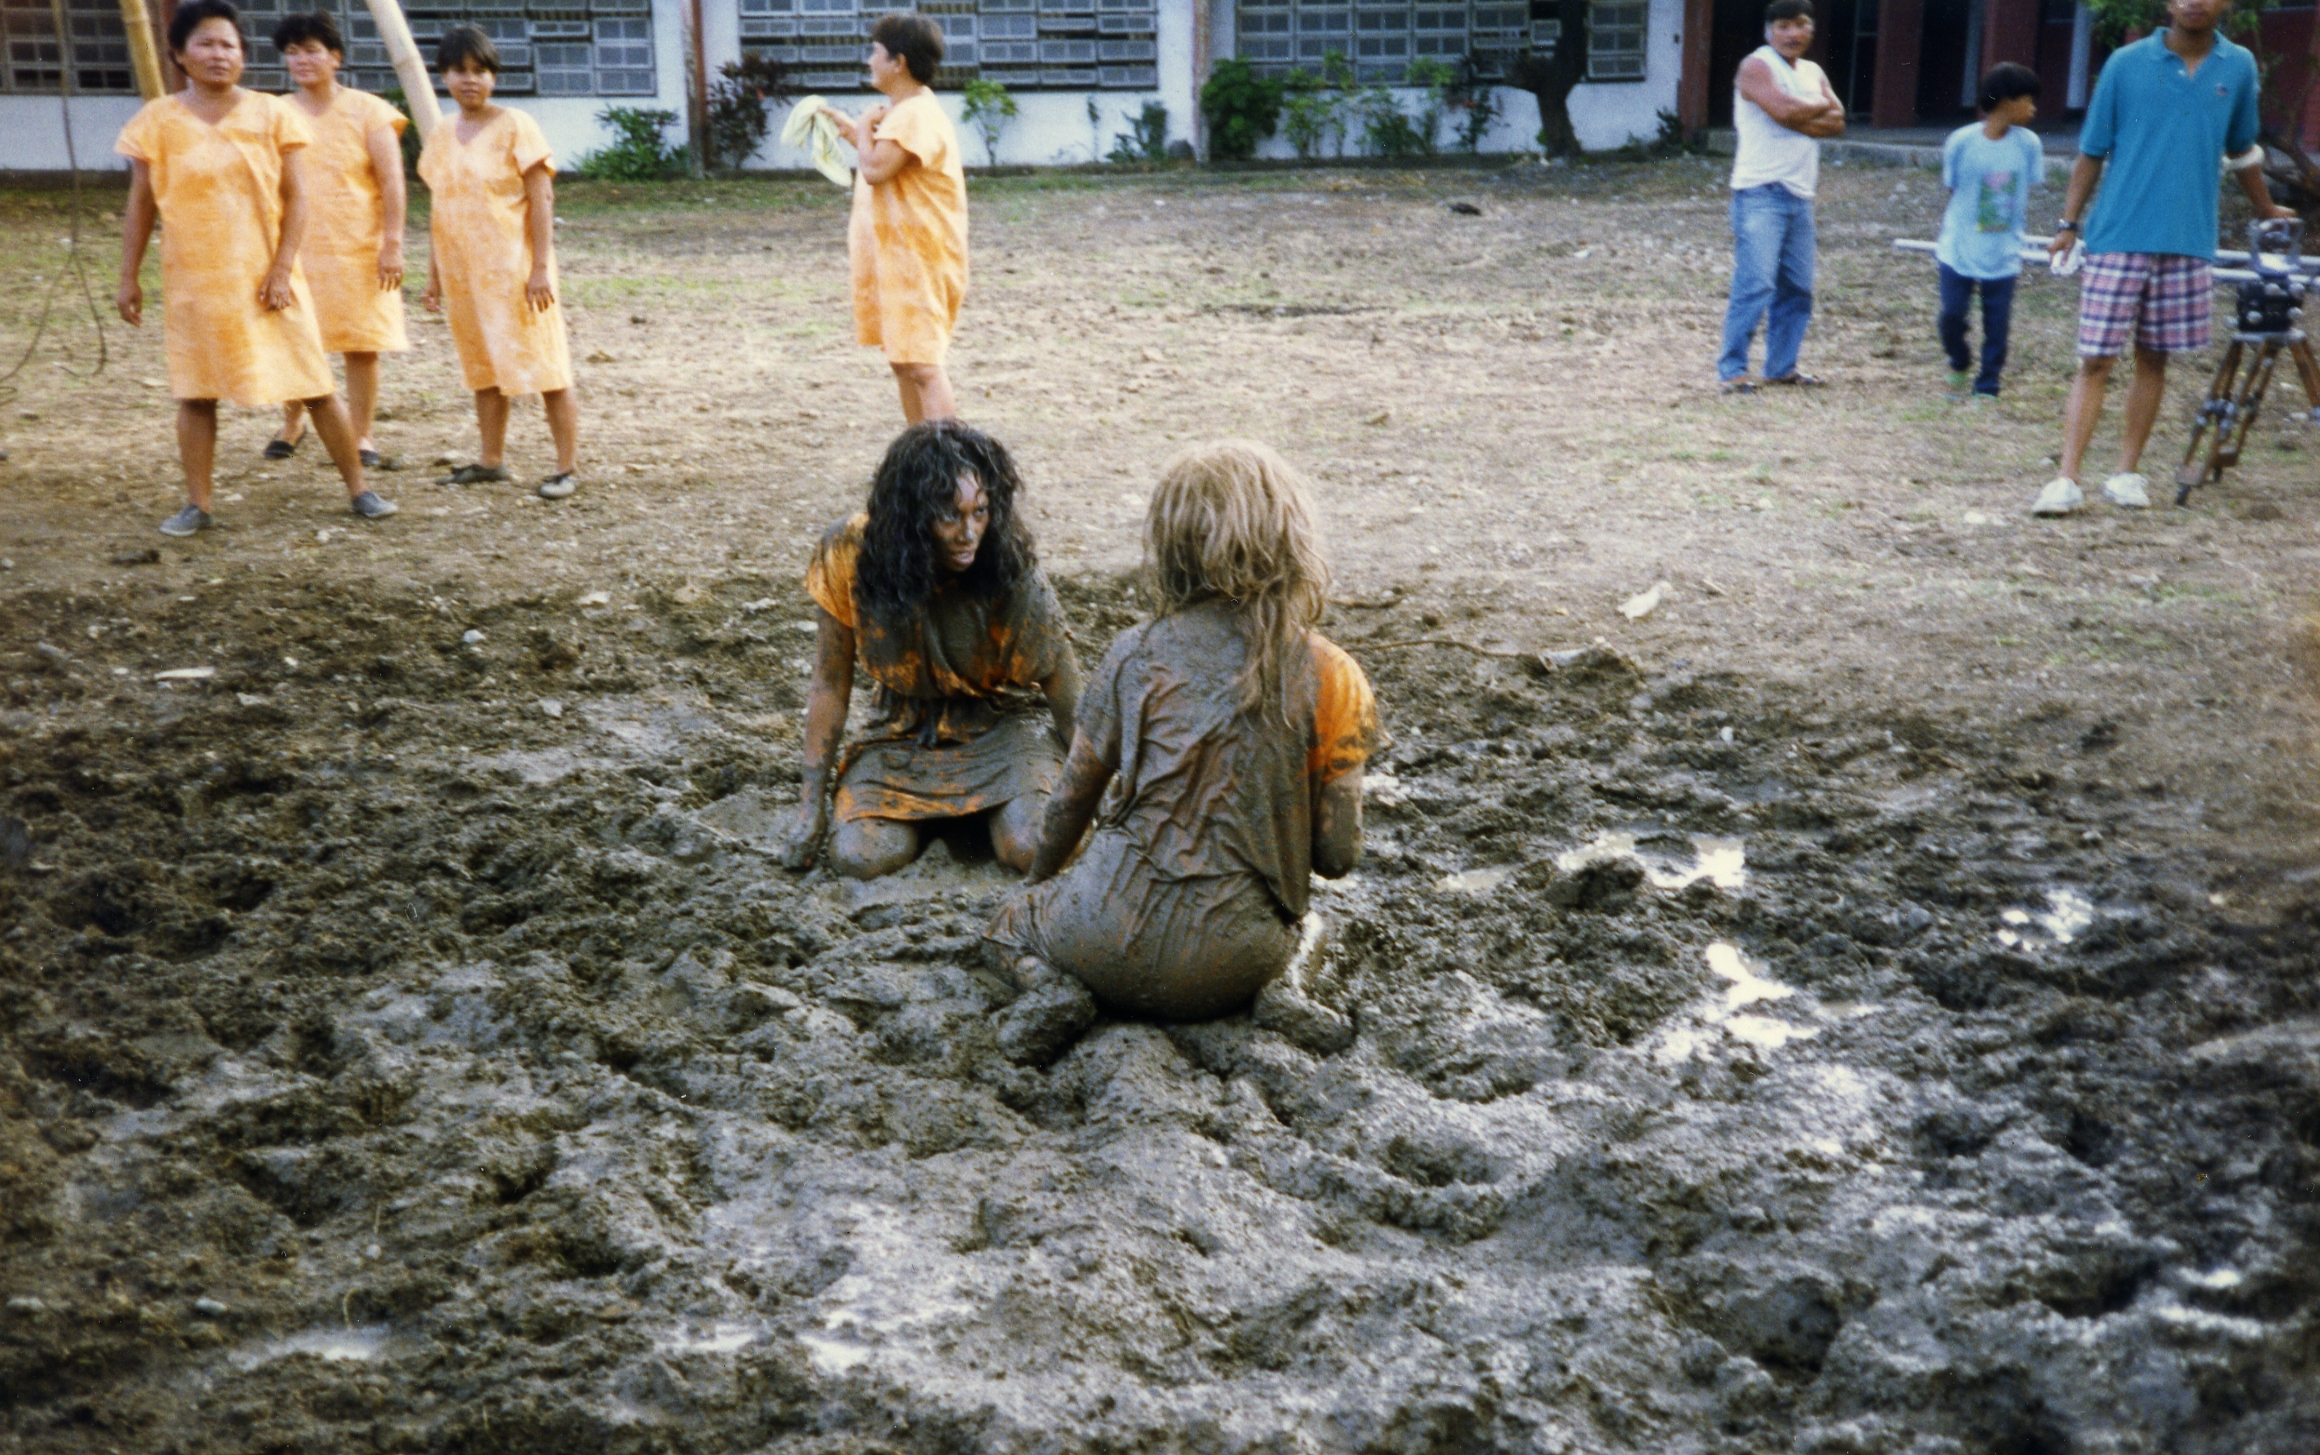 Pamella D'Pella as Paula, in the famous mud fight scene from 